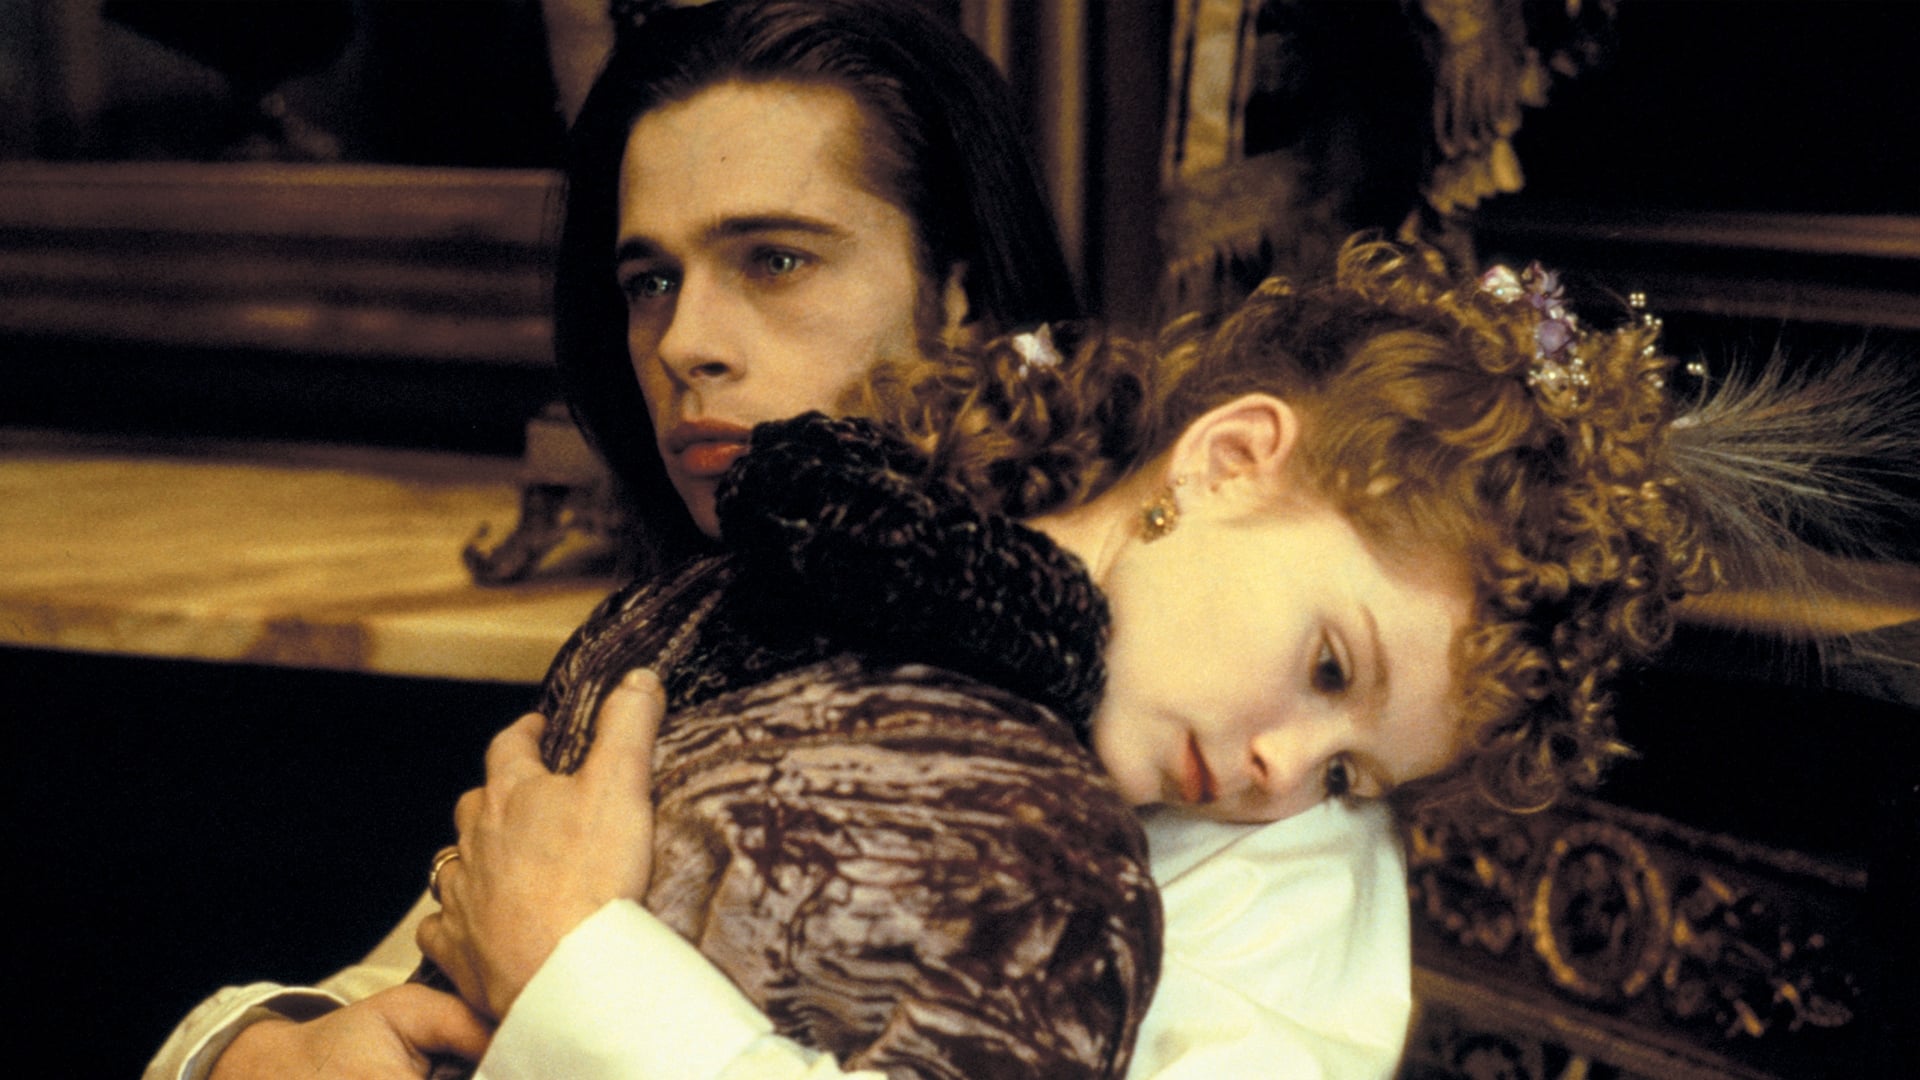 Tapeta filmu Interview s upírem / Interview with the Vampire: The Vampire Chronicles (1994)